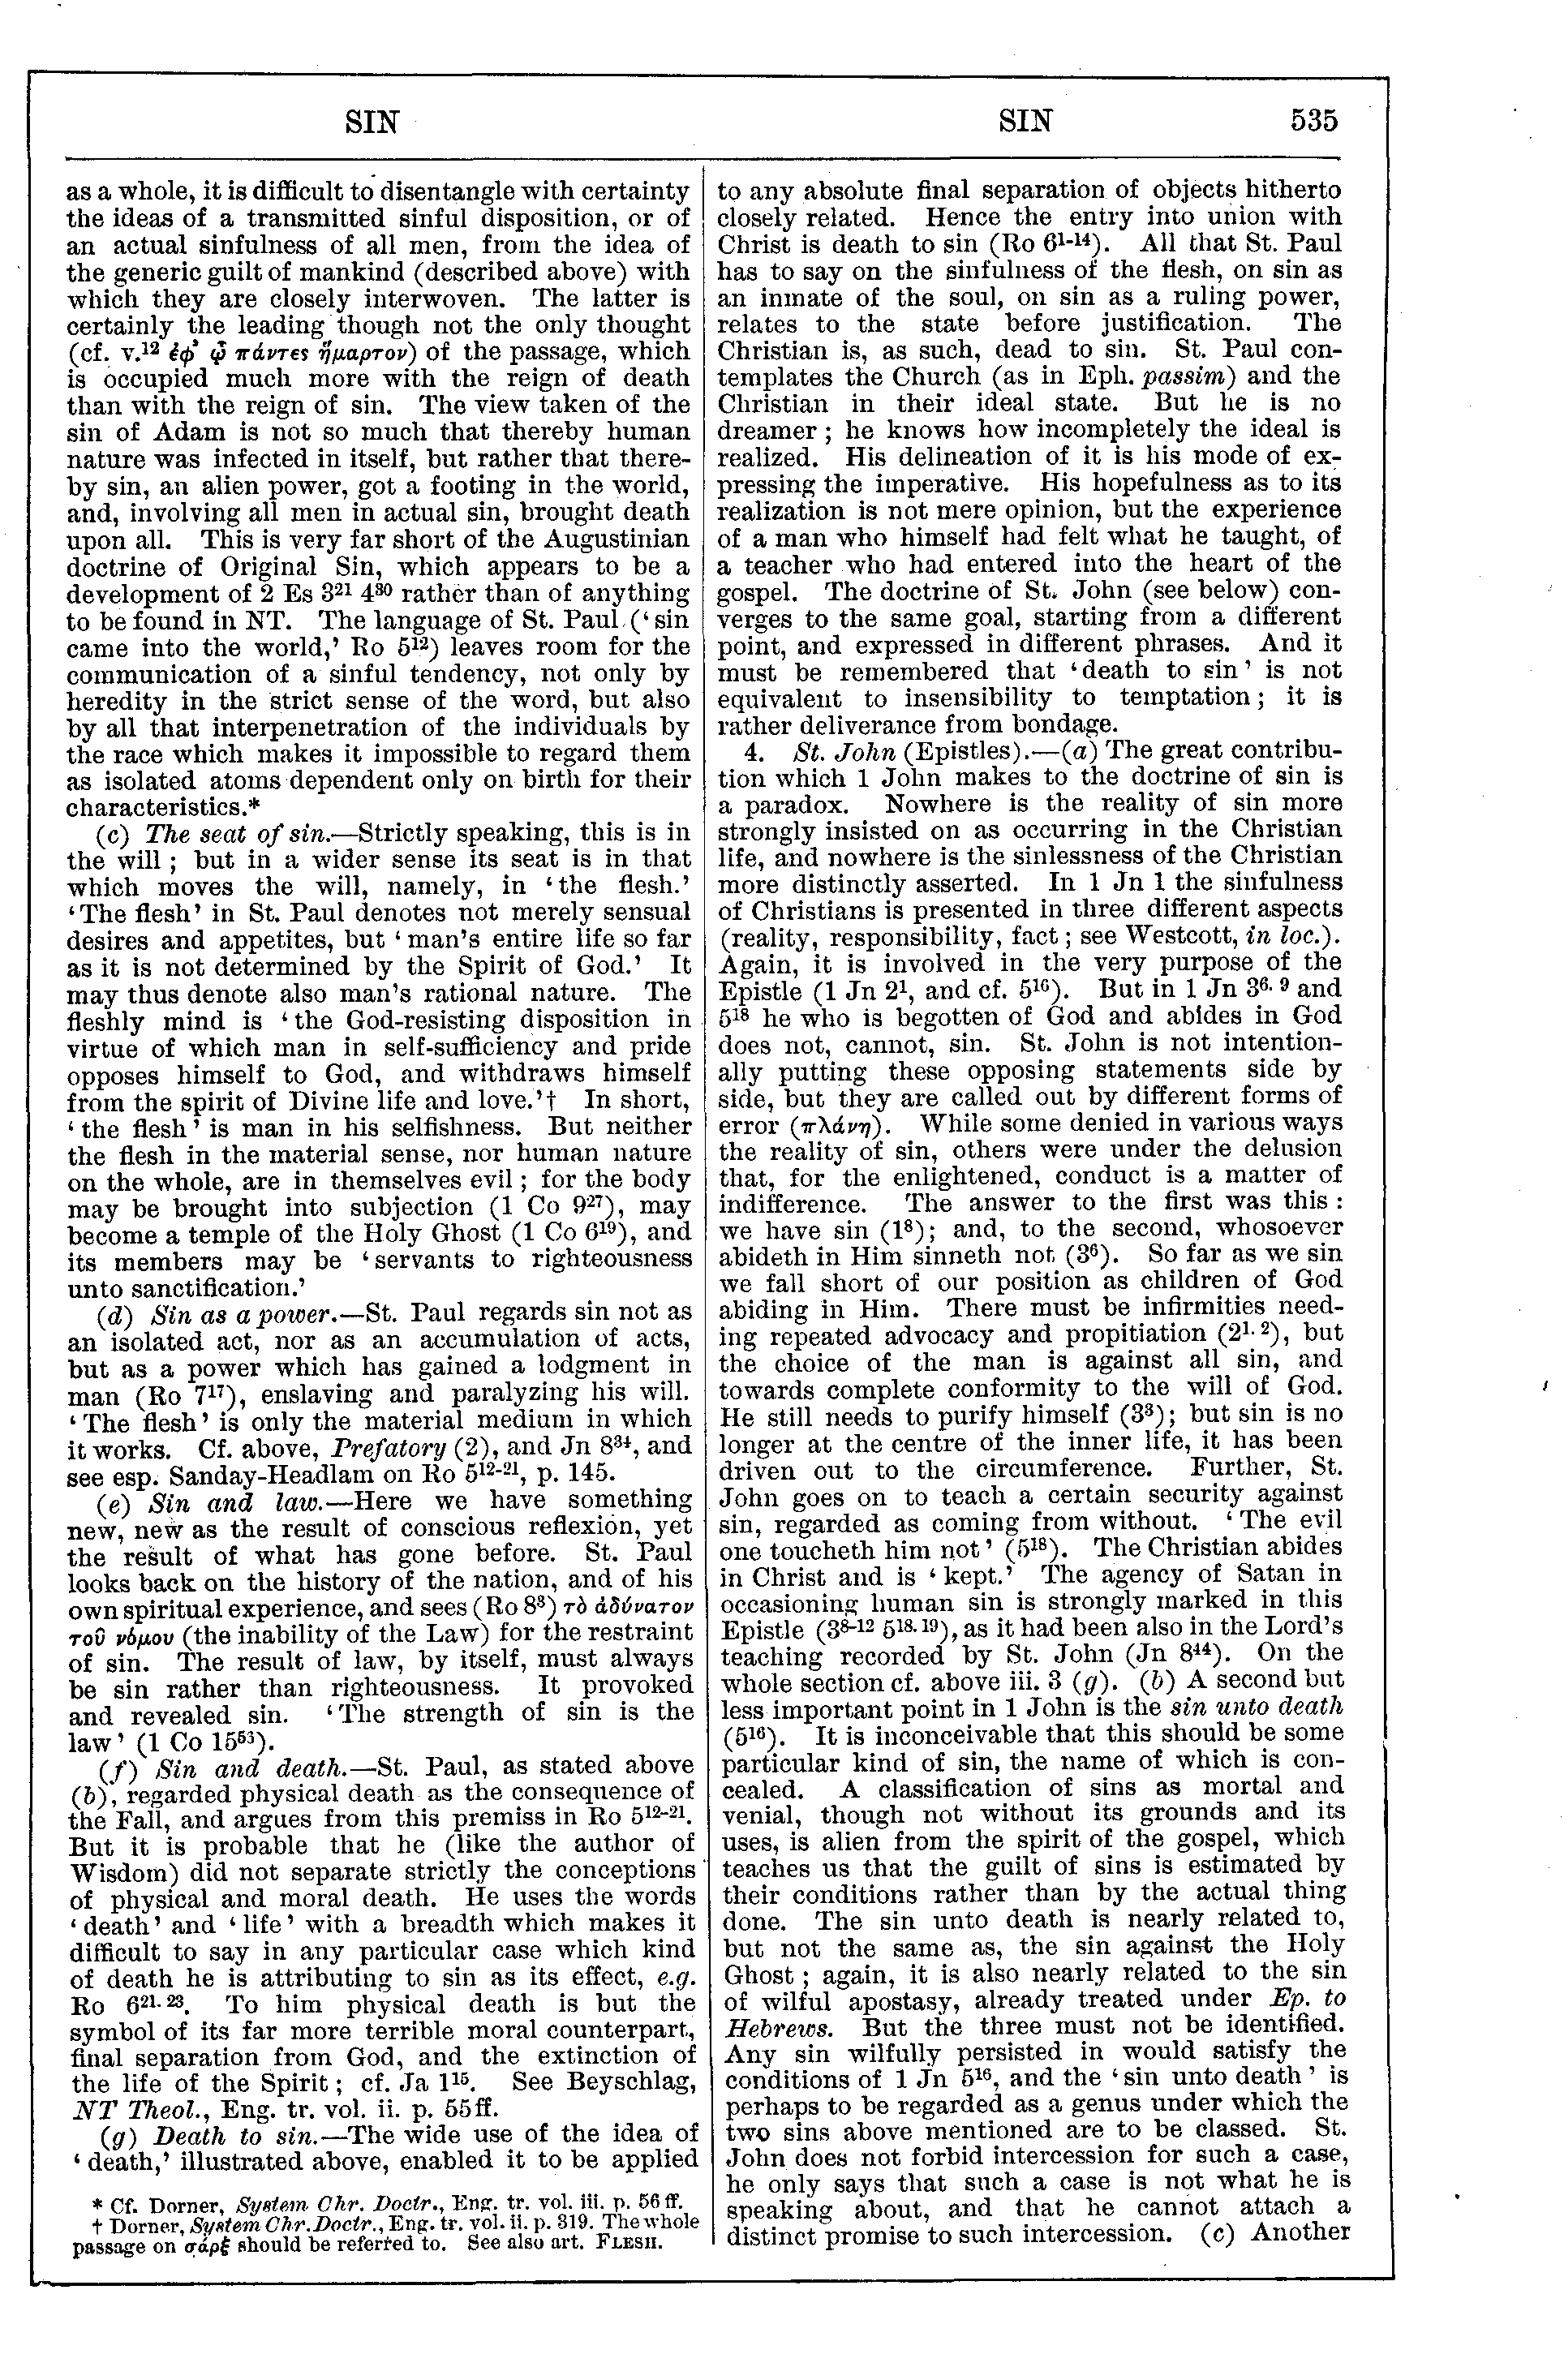 Image of page 535